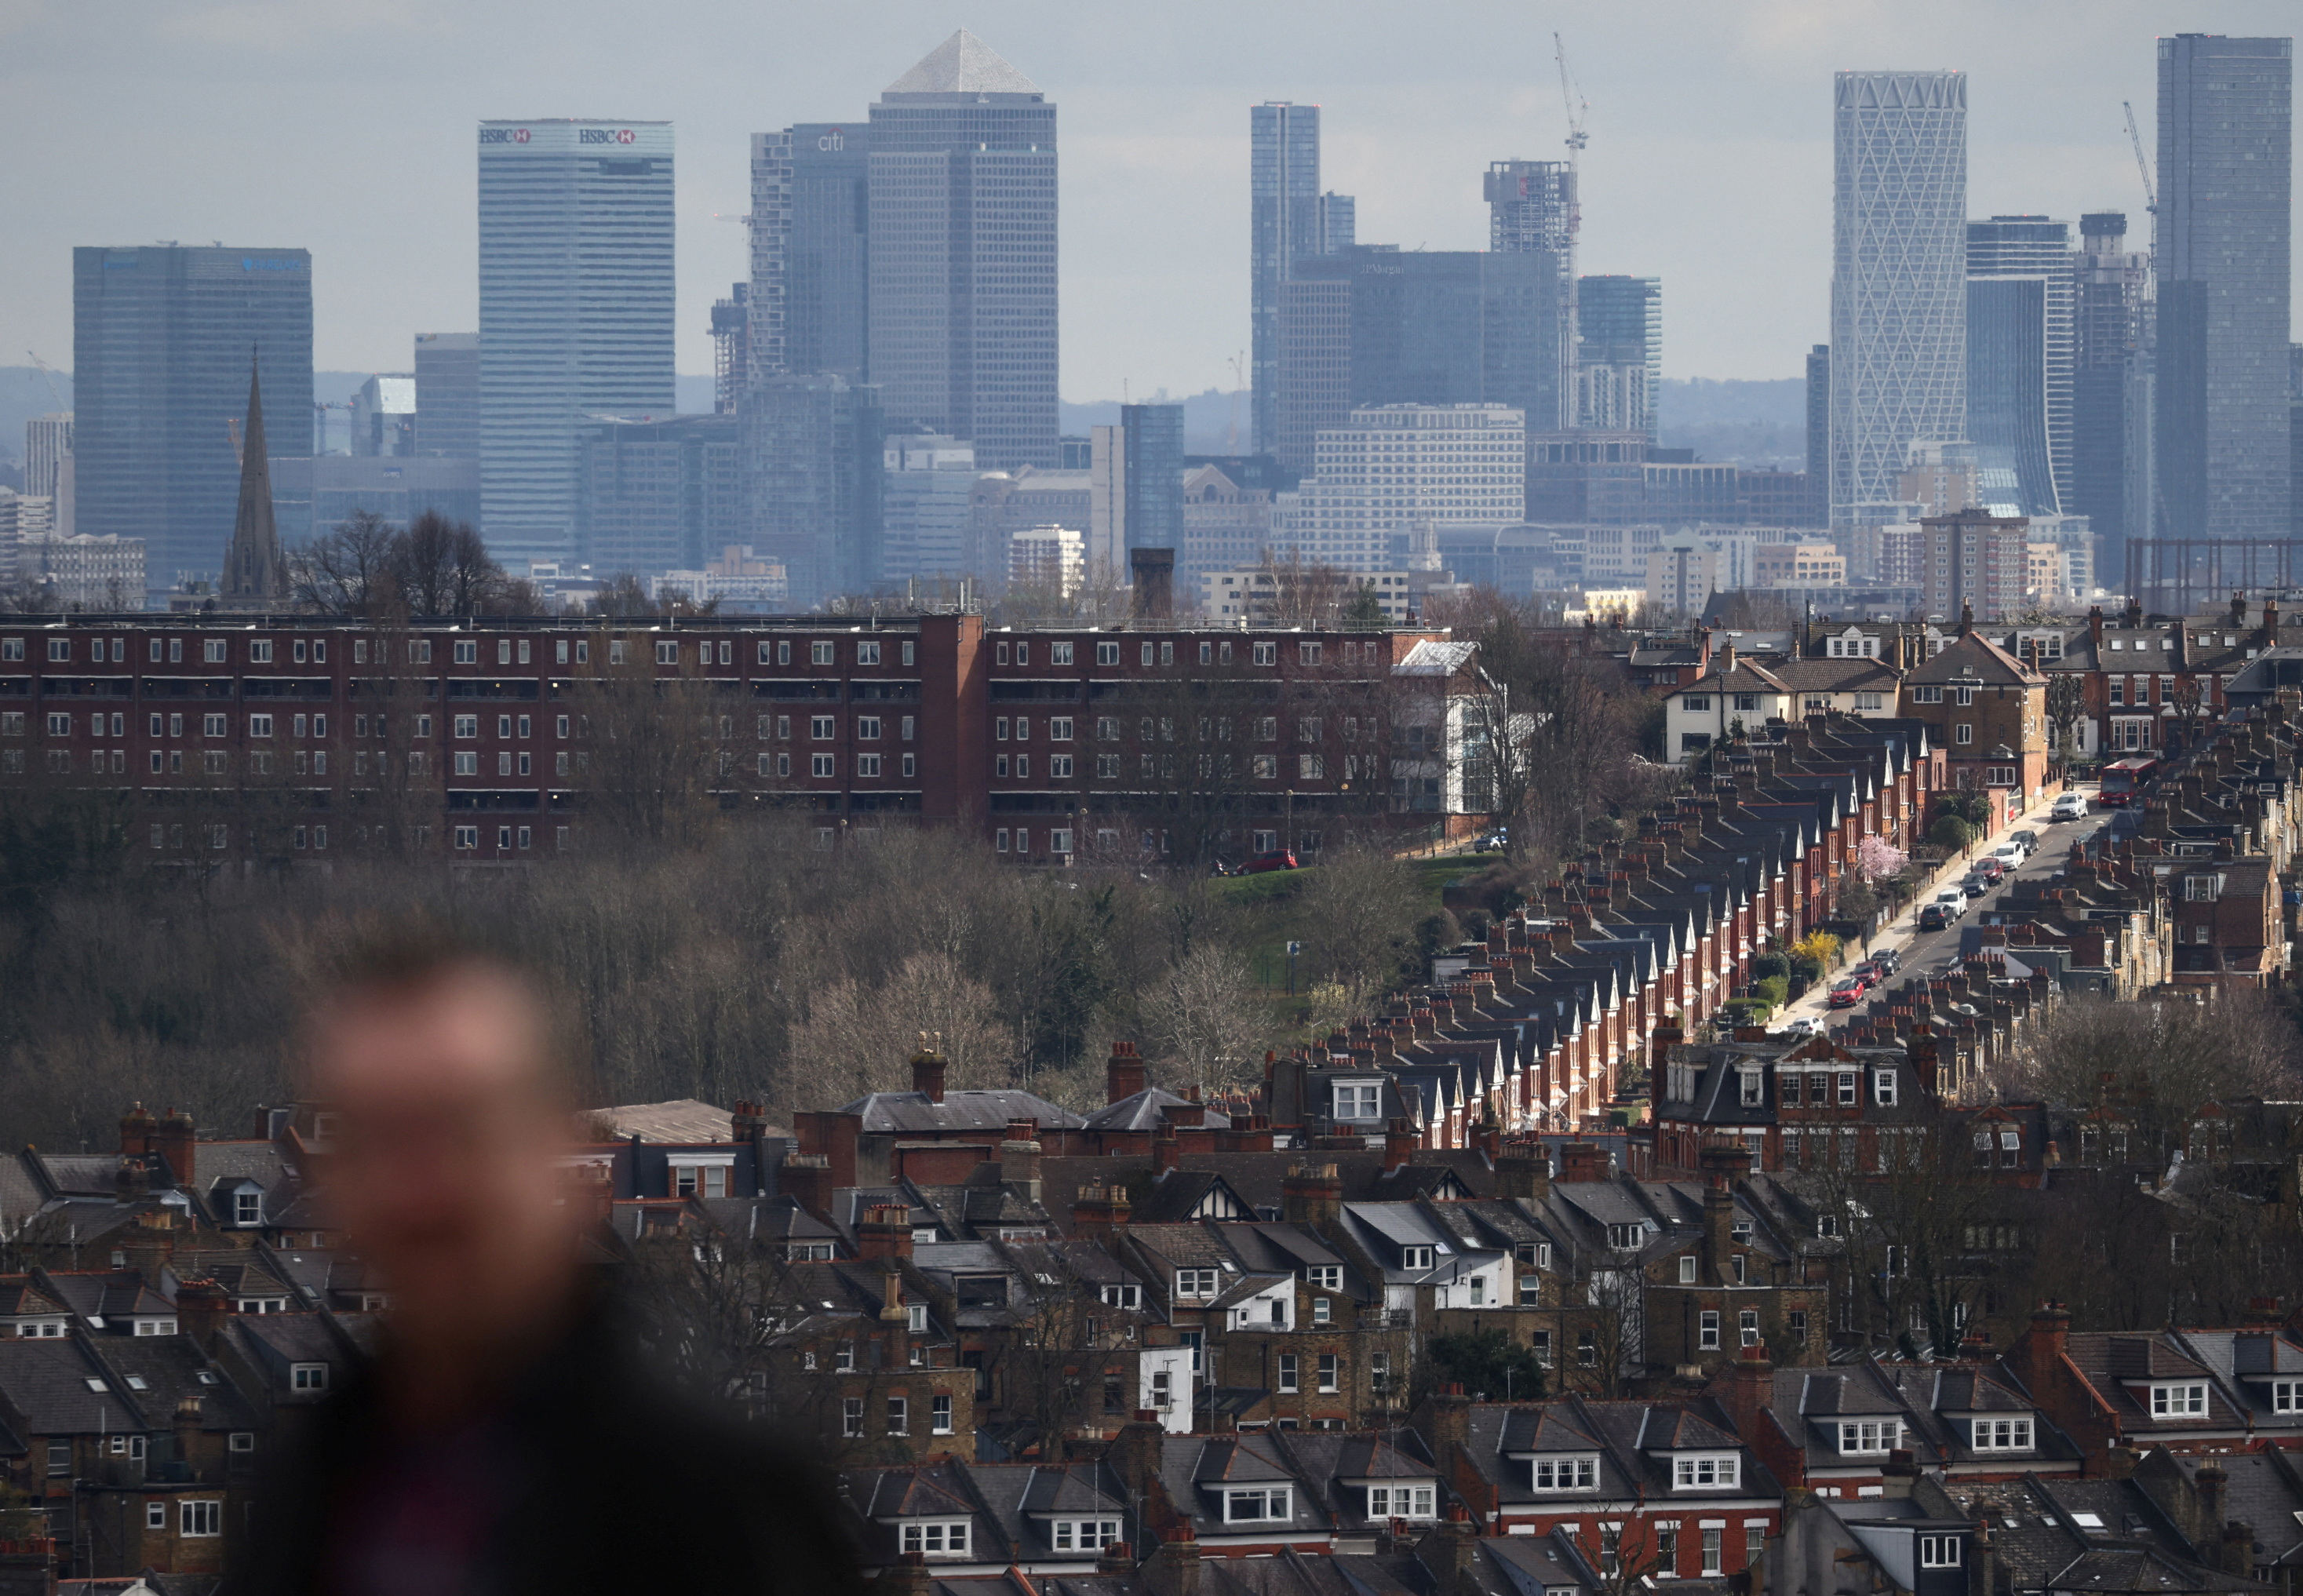 Rows of houses lie in front of the Canary Wharf skyline in London